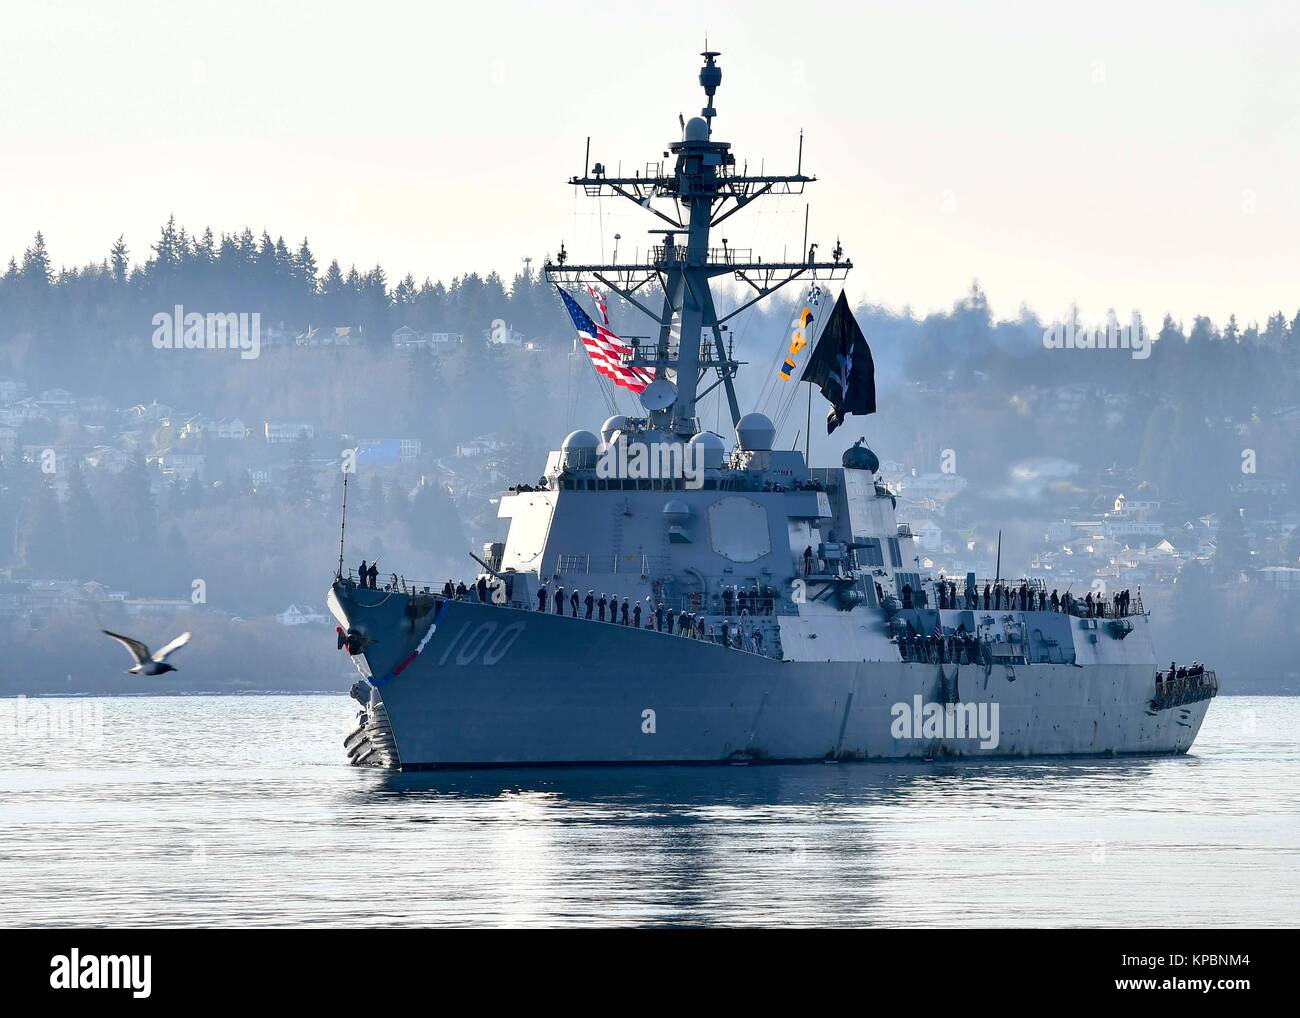 The U.S. Navy Arleigh Burke-class guided-missile destroyer USS Kidd returns home to the Naval Station Everett December 10, 2017 in Everett, Washington. Stock Photo